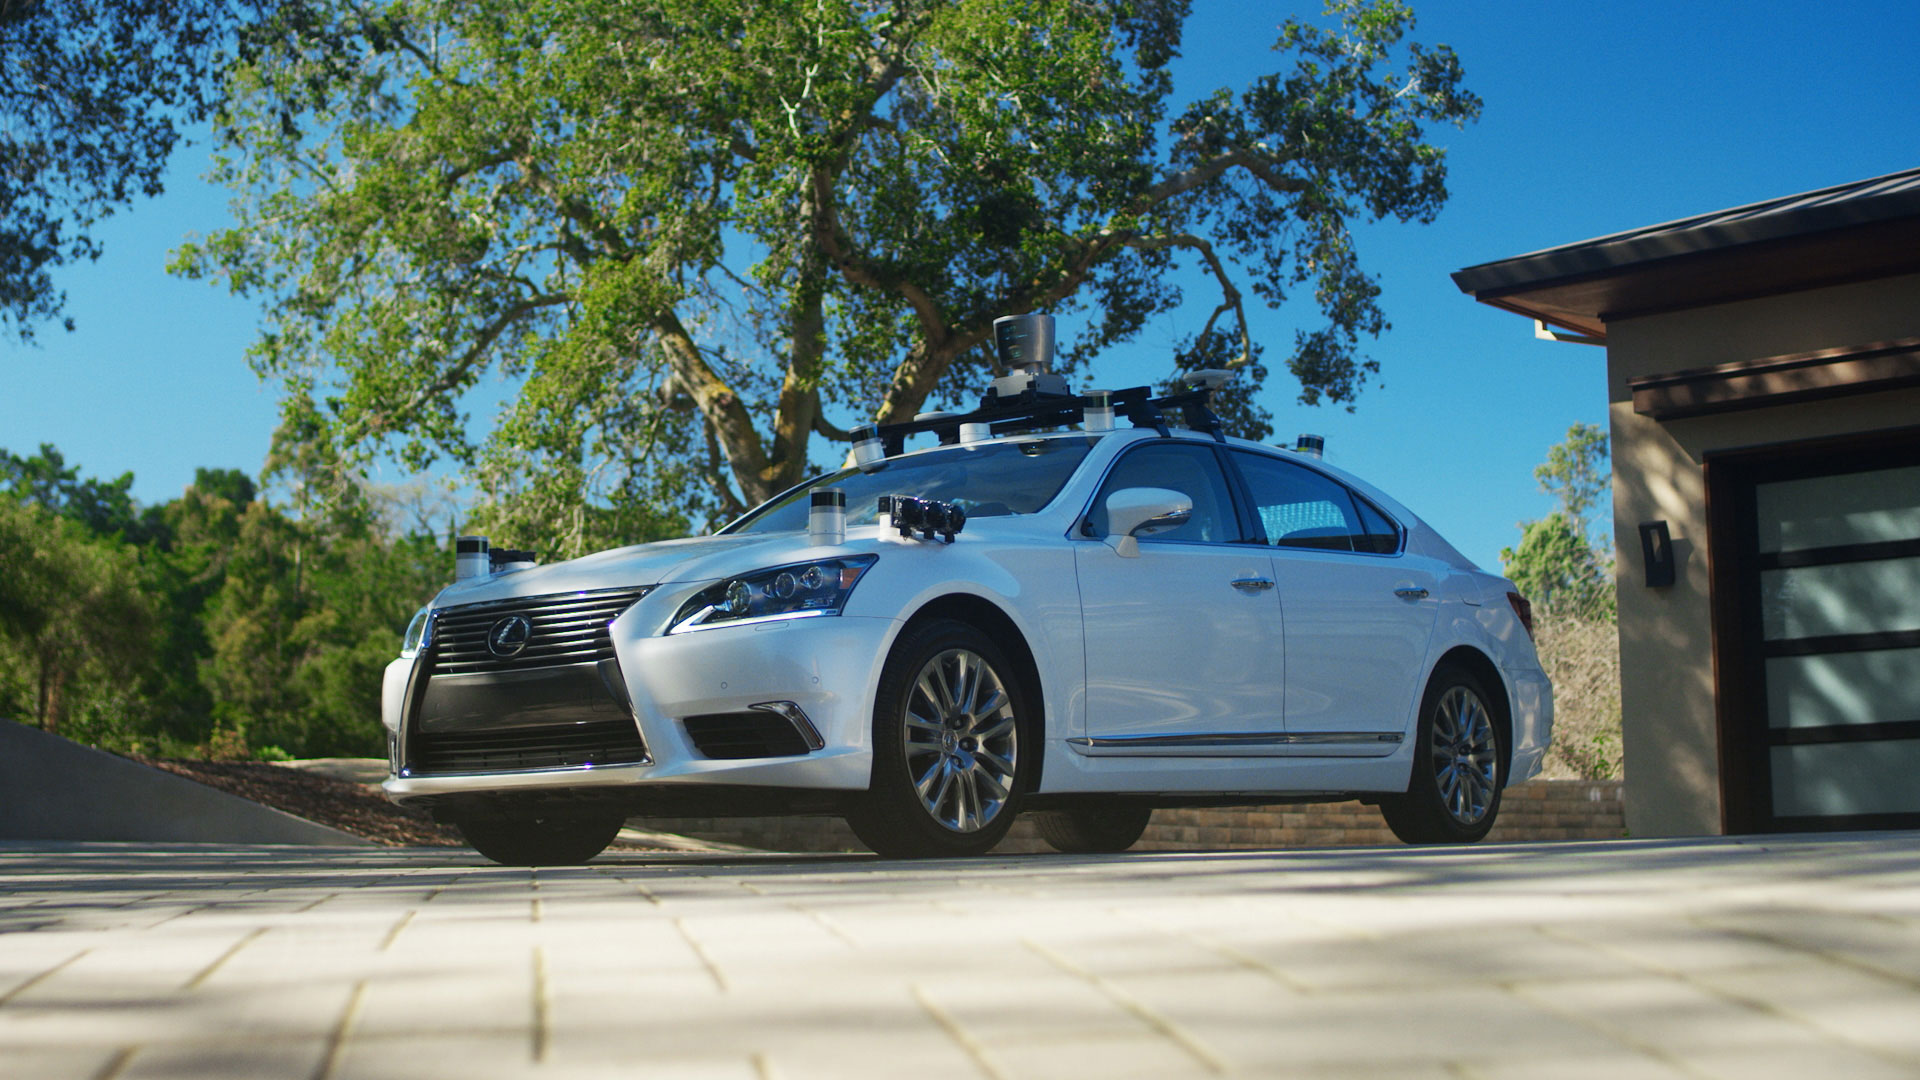 This modified Lexus is used by Toyota to test autonomous driving software.